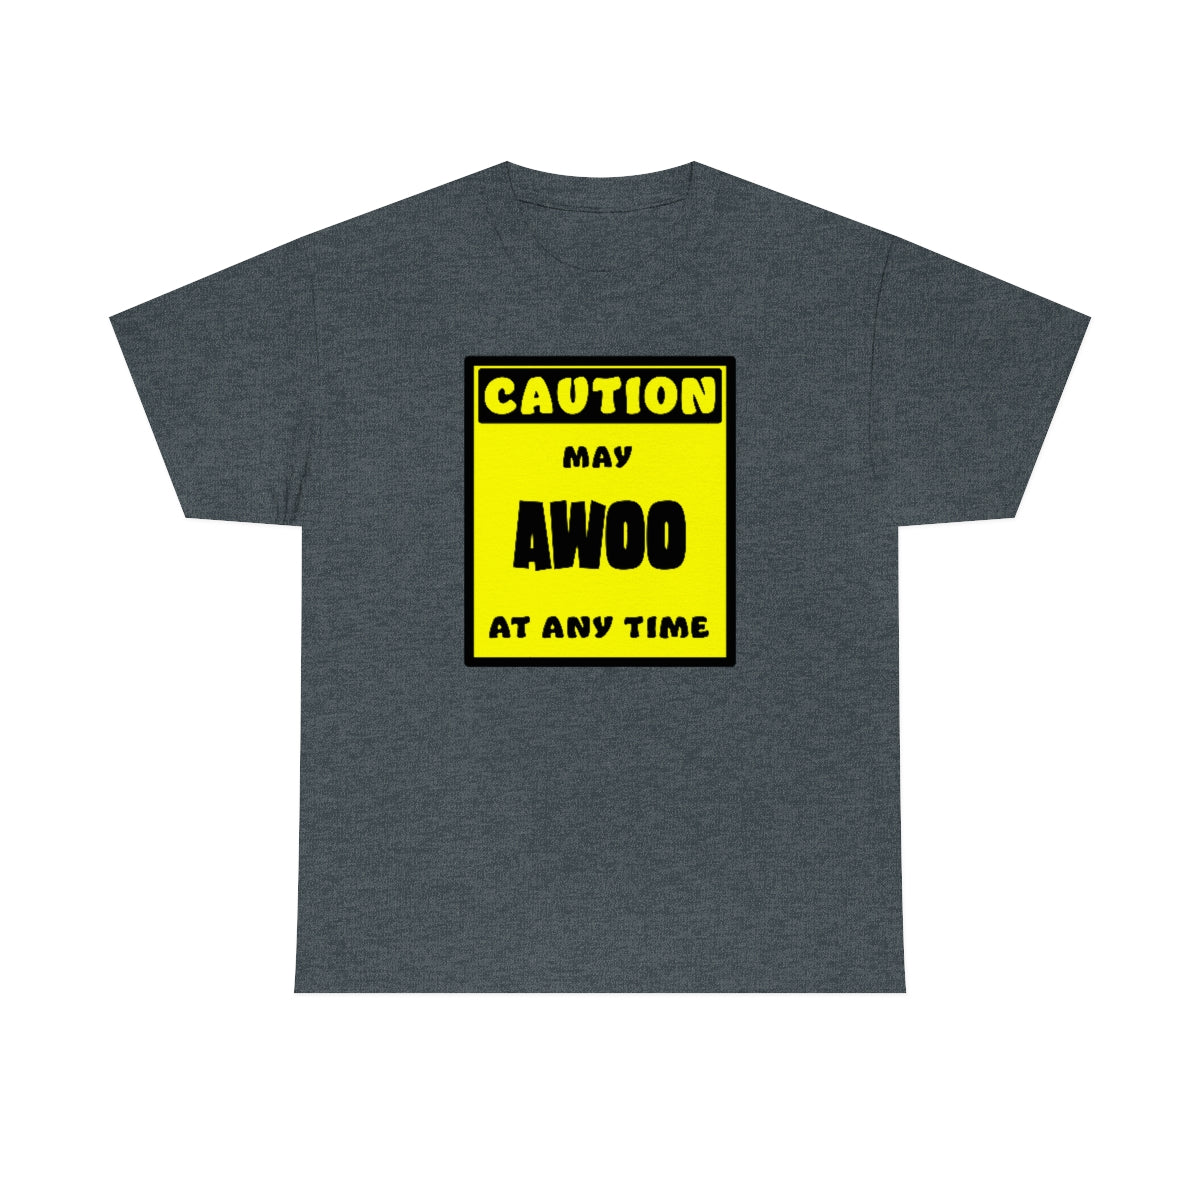 CAUTION! May AWOO at any time! - T-Shirt T-Shirt AFLT-Whootorca Dark Heather S 